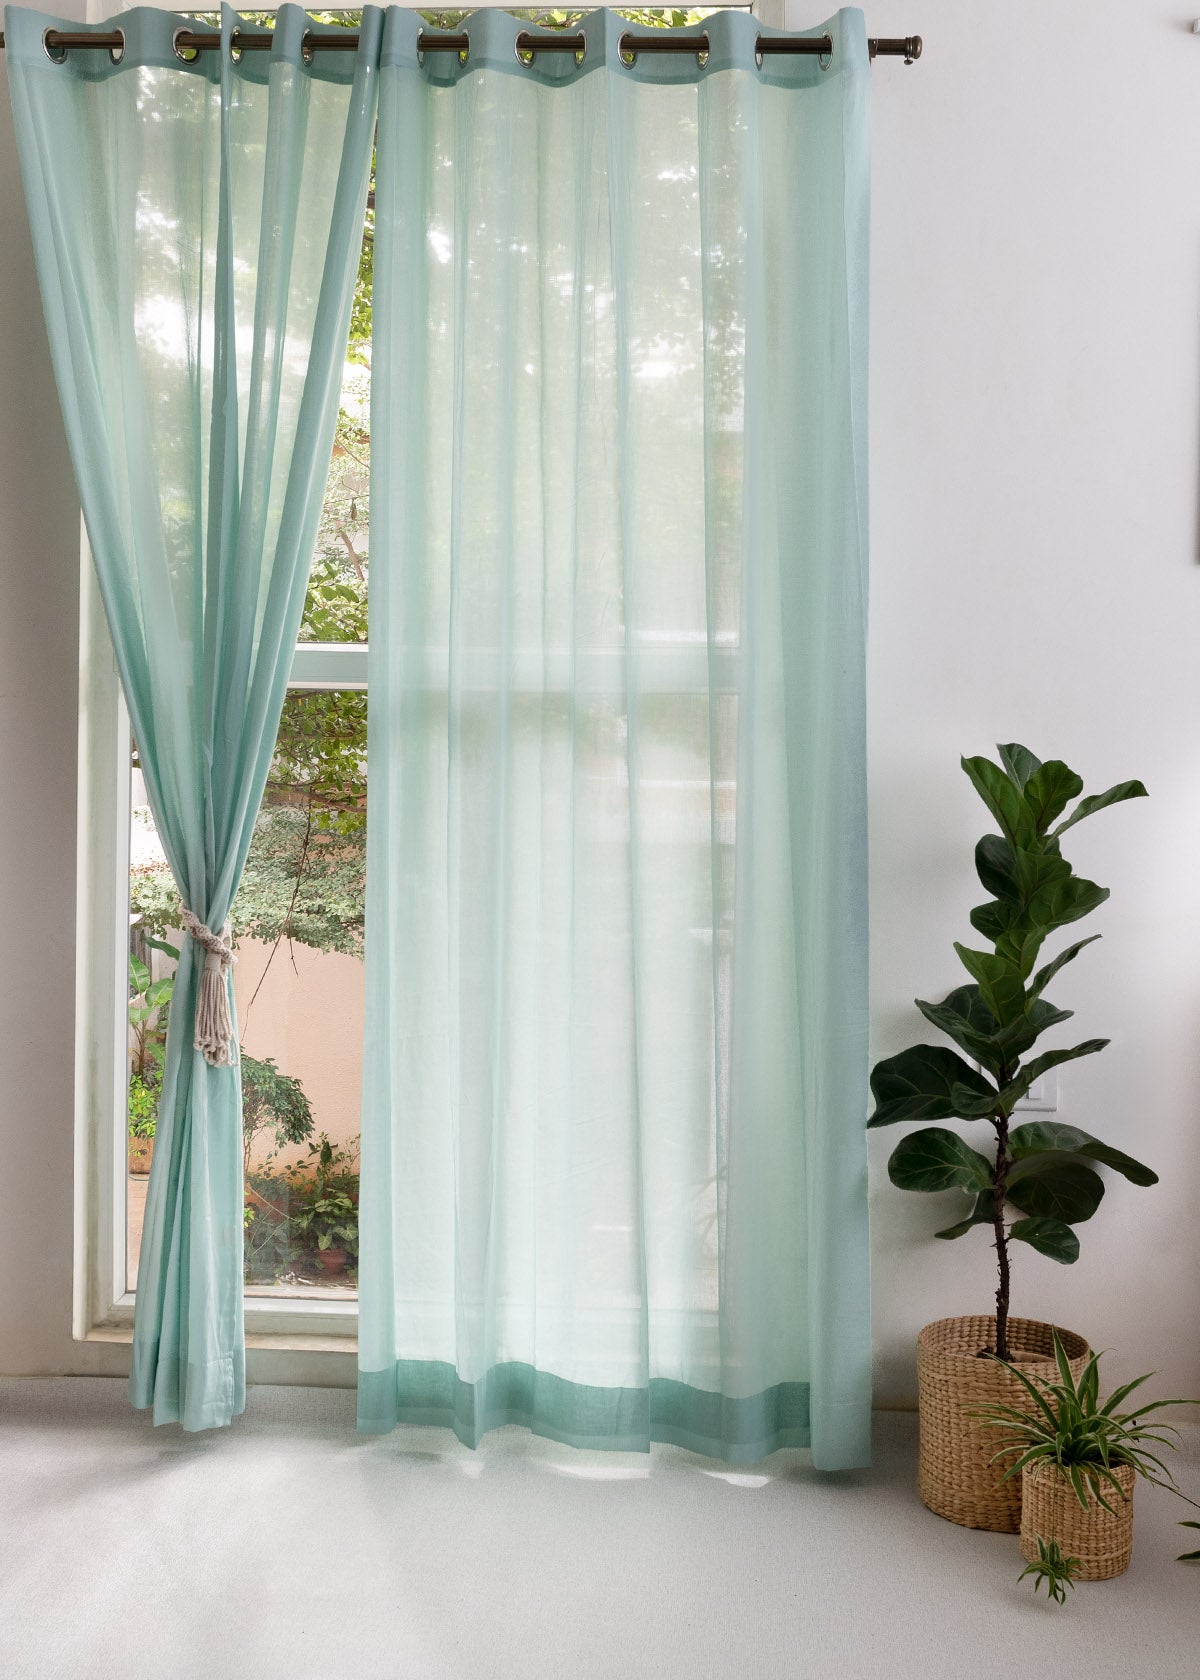 Solid Nile Blue sheer 100% Customizable Cotton plain curtain for Living room & bedroom - Light filtering